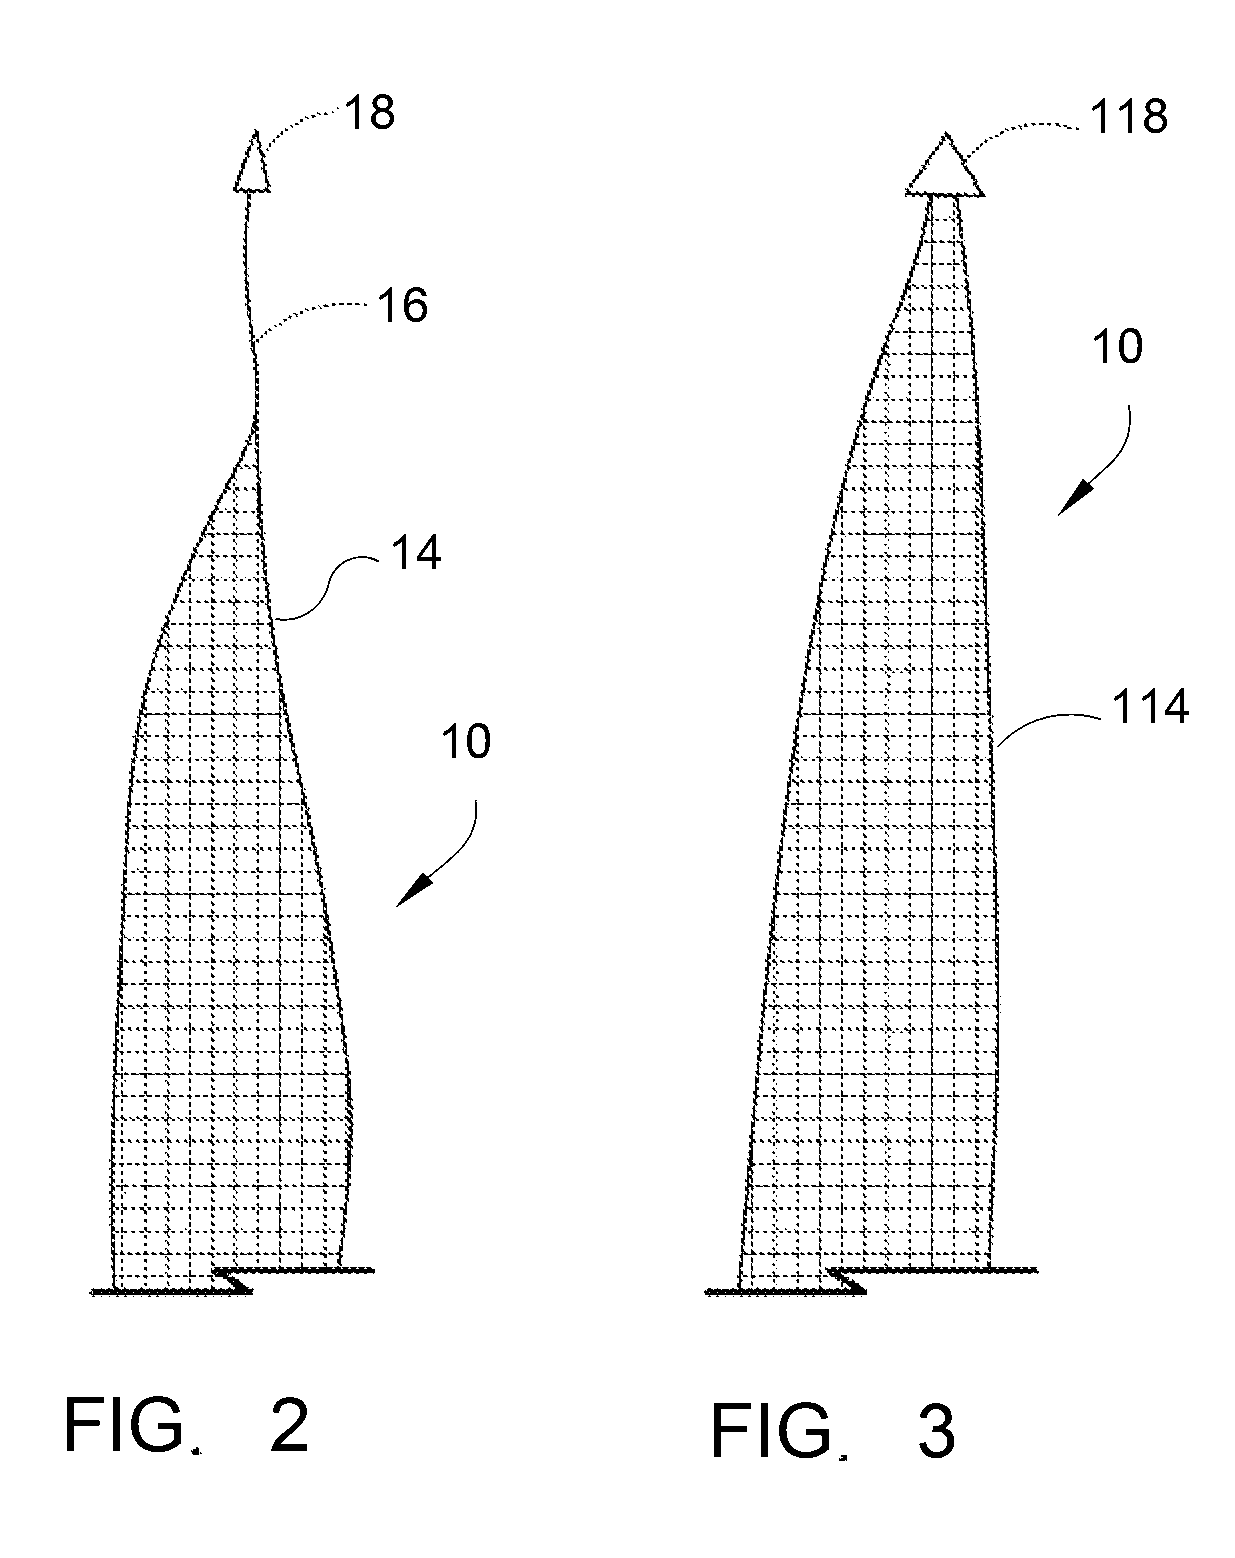 Method for treating prolapse and incontinence